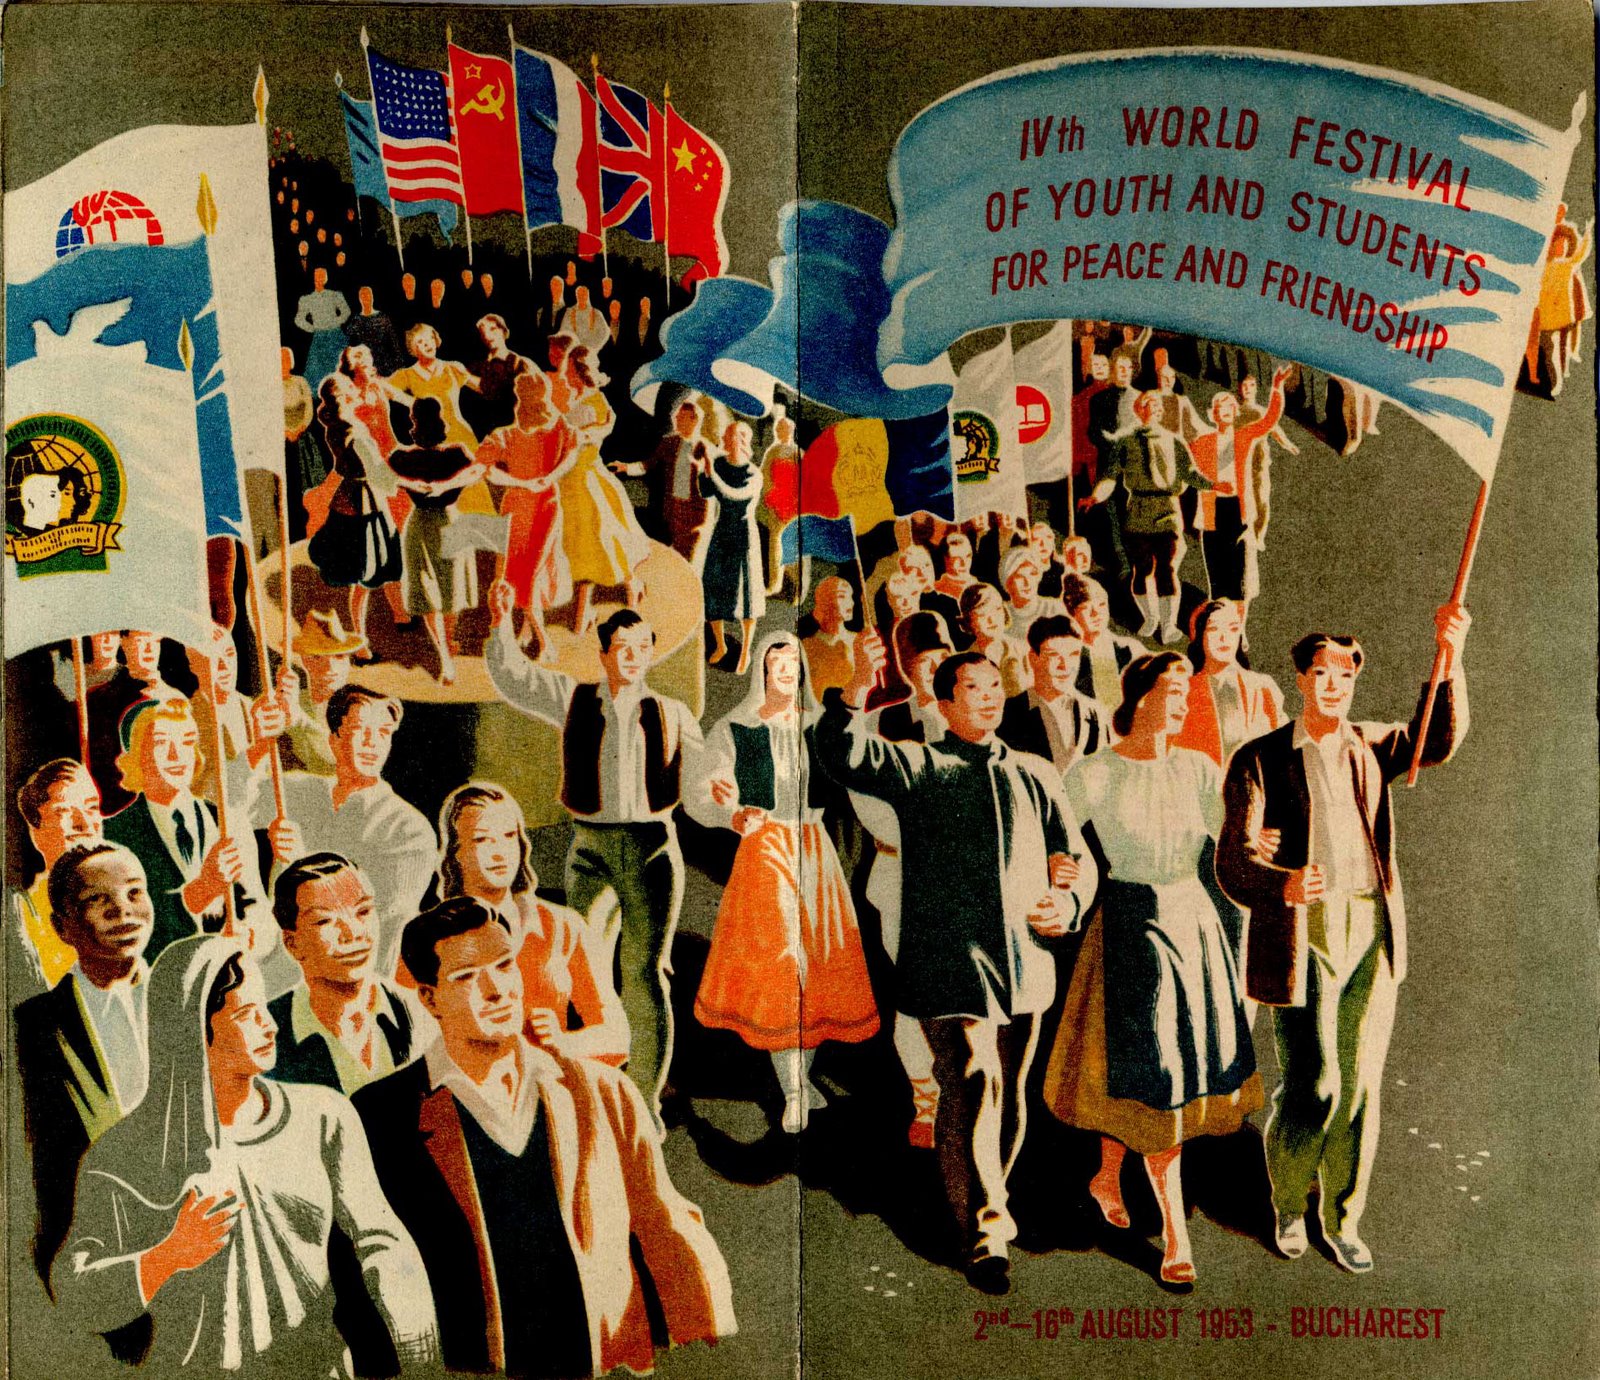 Illustration spanning a two-page spread with a crowd of people holding flags from around the world. One banner says: "IVth Worled Festival of Youth and Students for Peace and Friendship," At the lower left it says: 2nd-18th August 1953, Bucharest